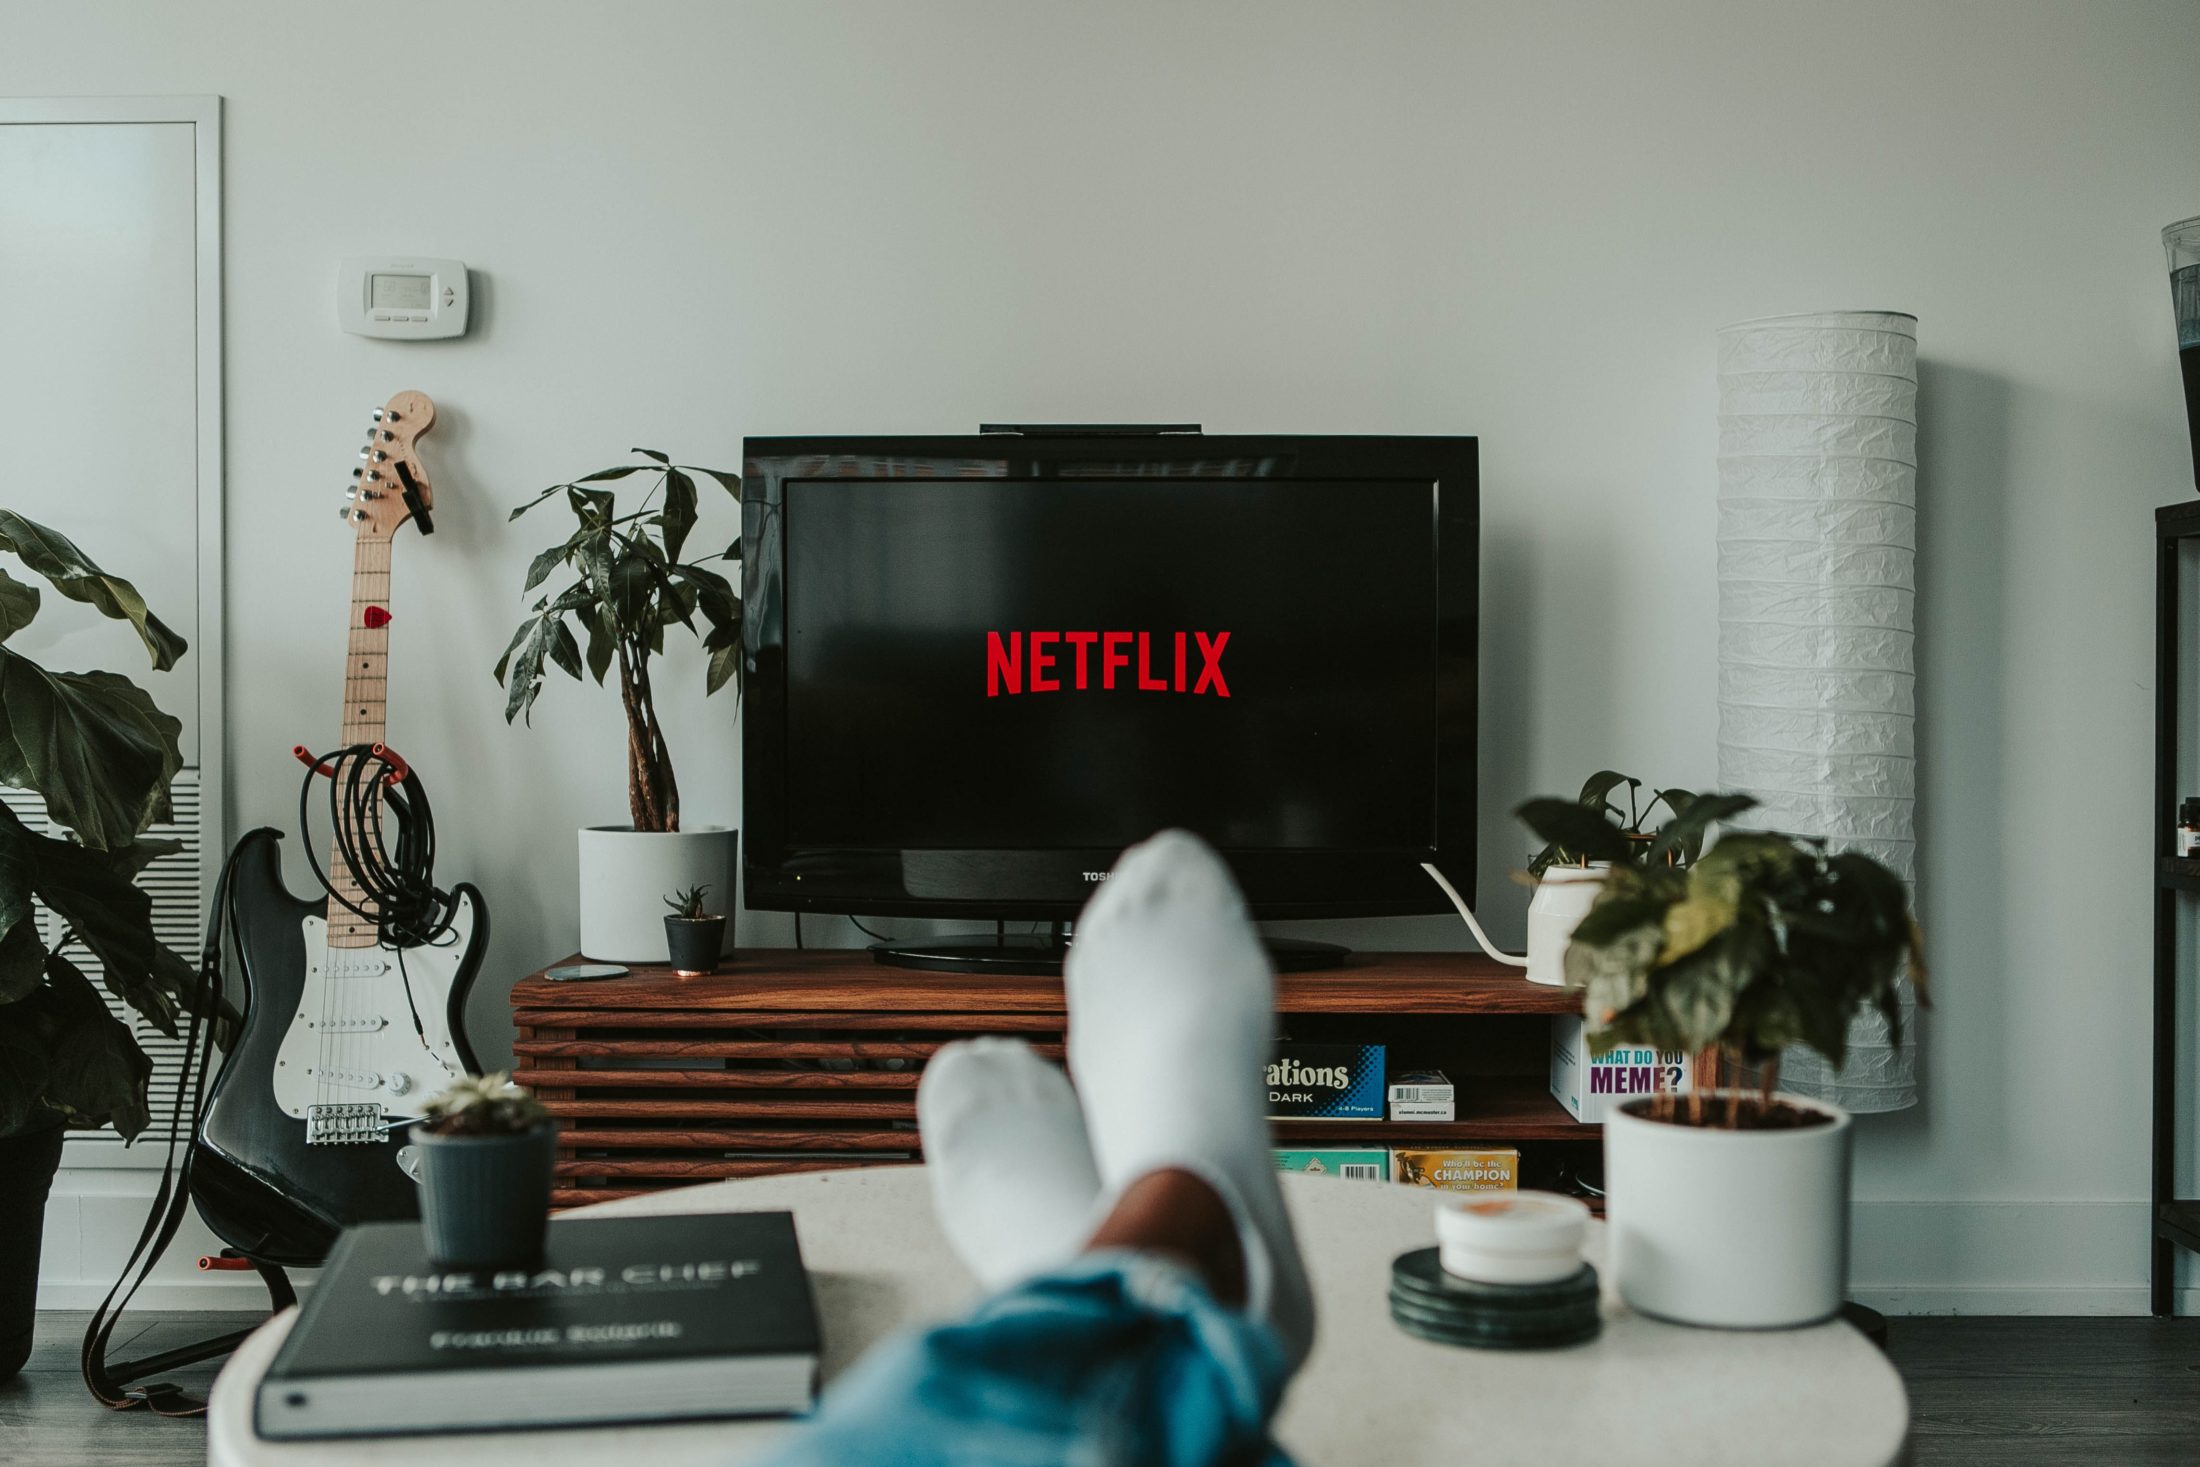 Persons feet up, while TV in the background display Netflix on the TV